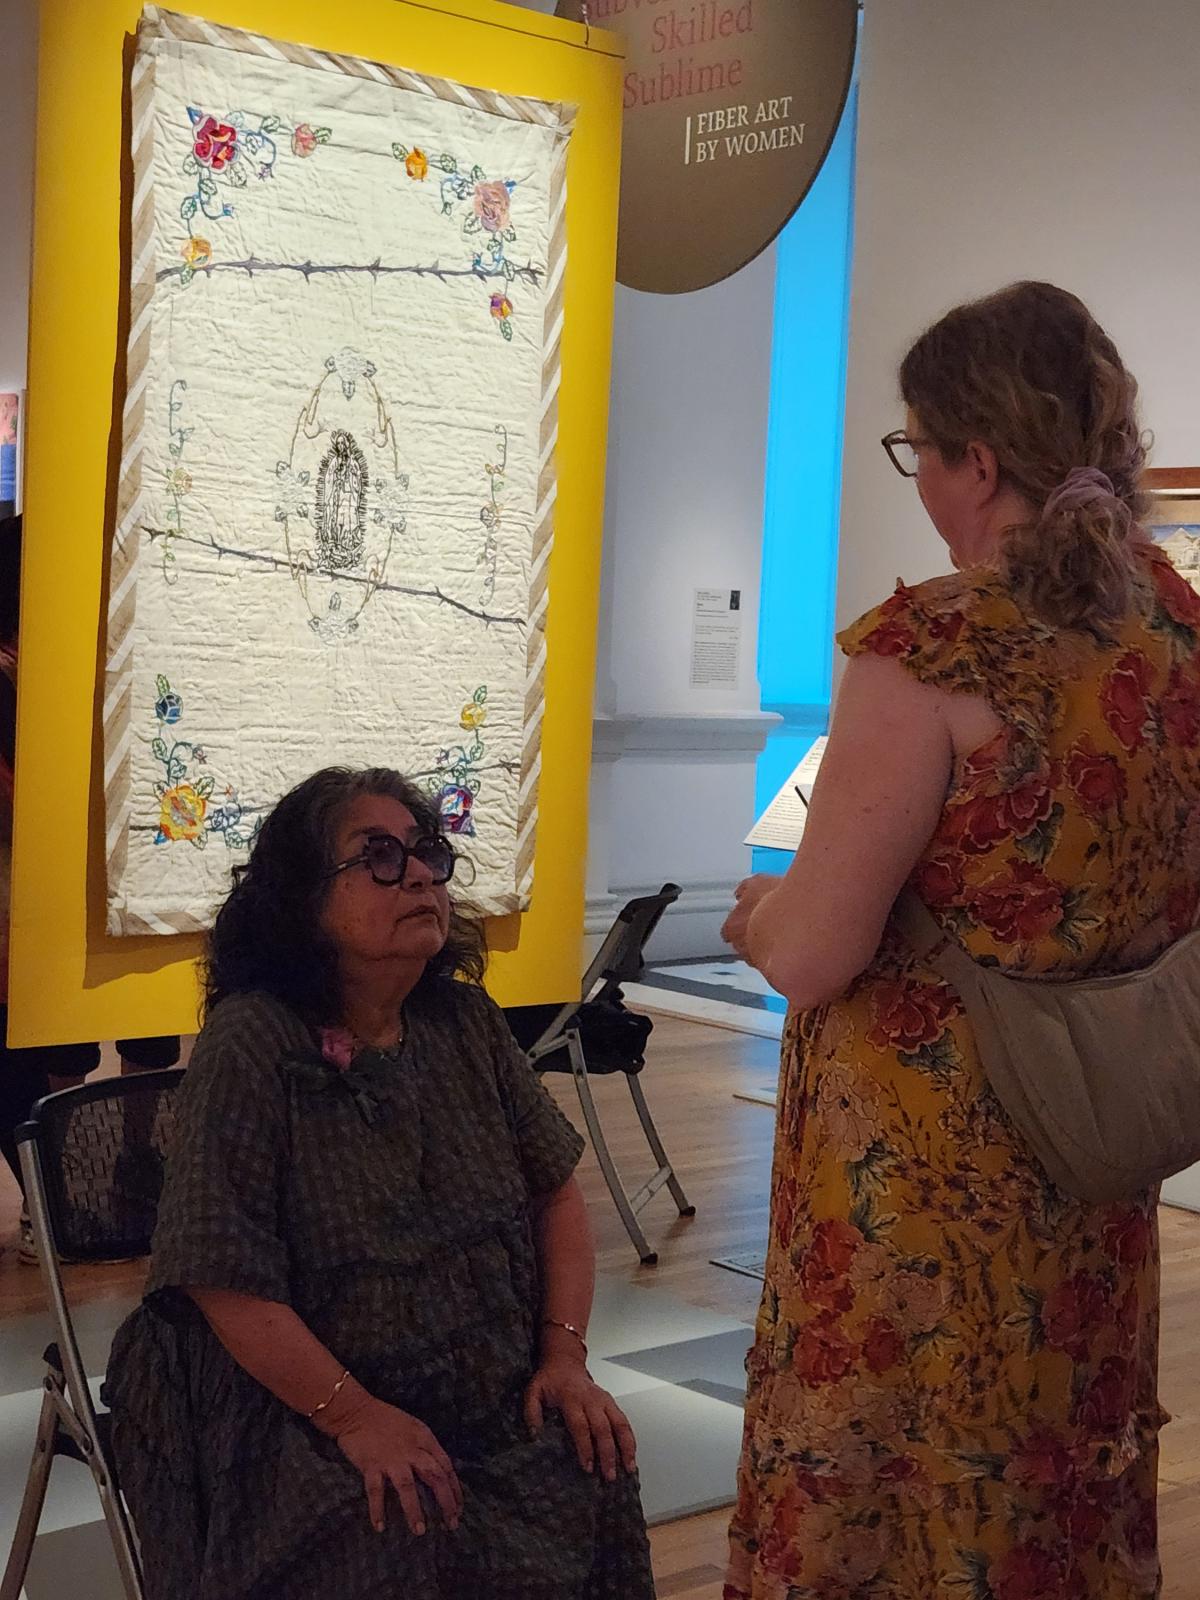 A person sitting in a chair looks up at a person in front of her. Behind them, an artwork hangs on a yellow wall.